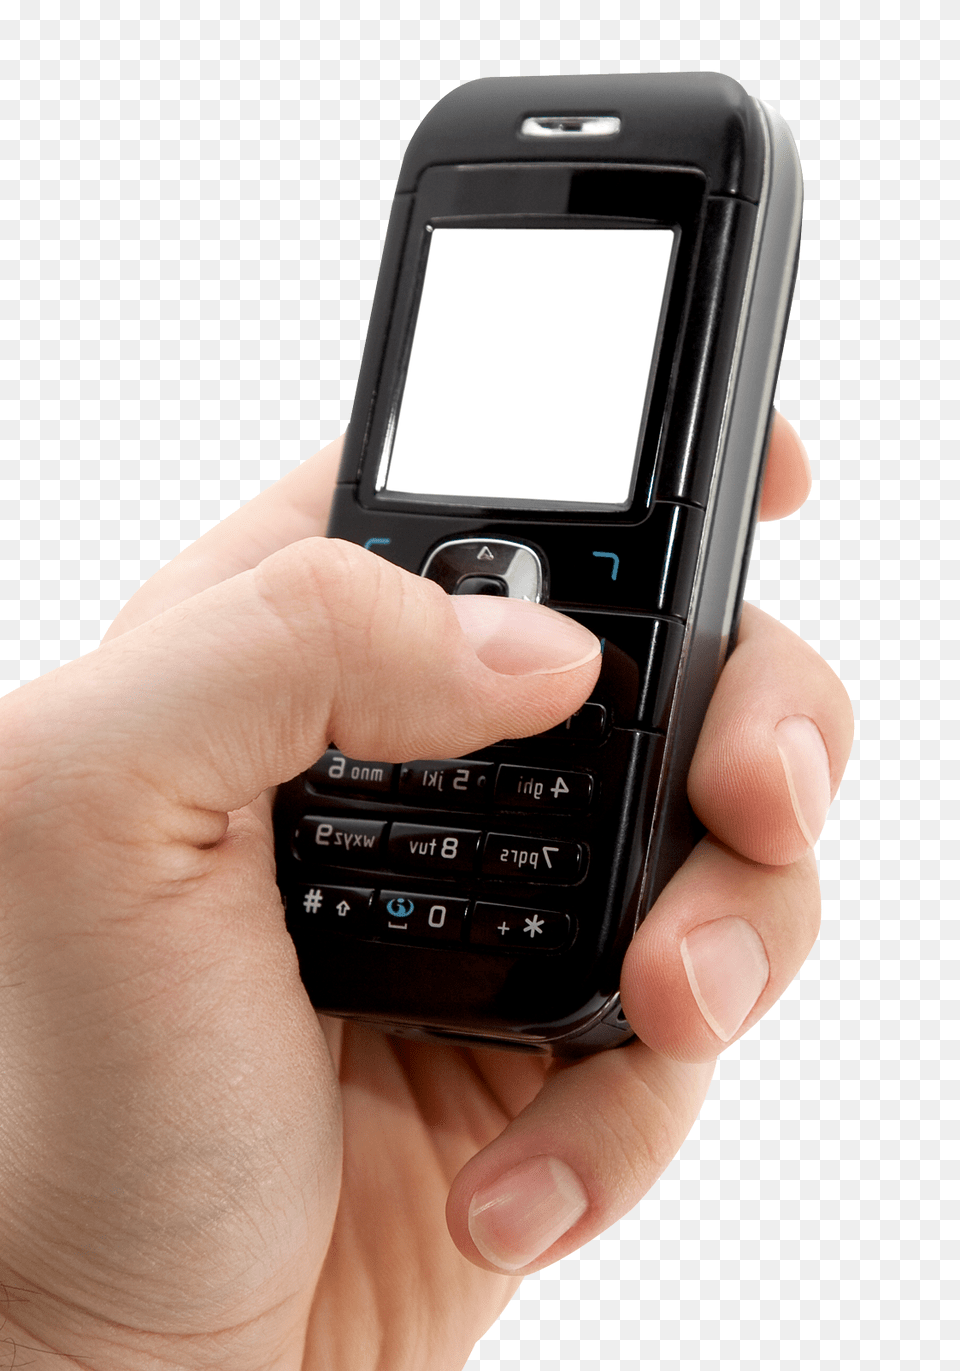 Mobile Phone In Hand Analog Mobile Phone With Hand, Electronics, Mobile Phone, Texting Png Image